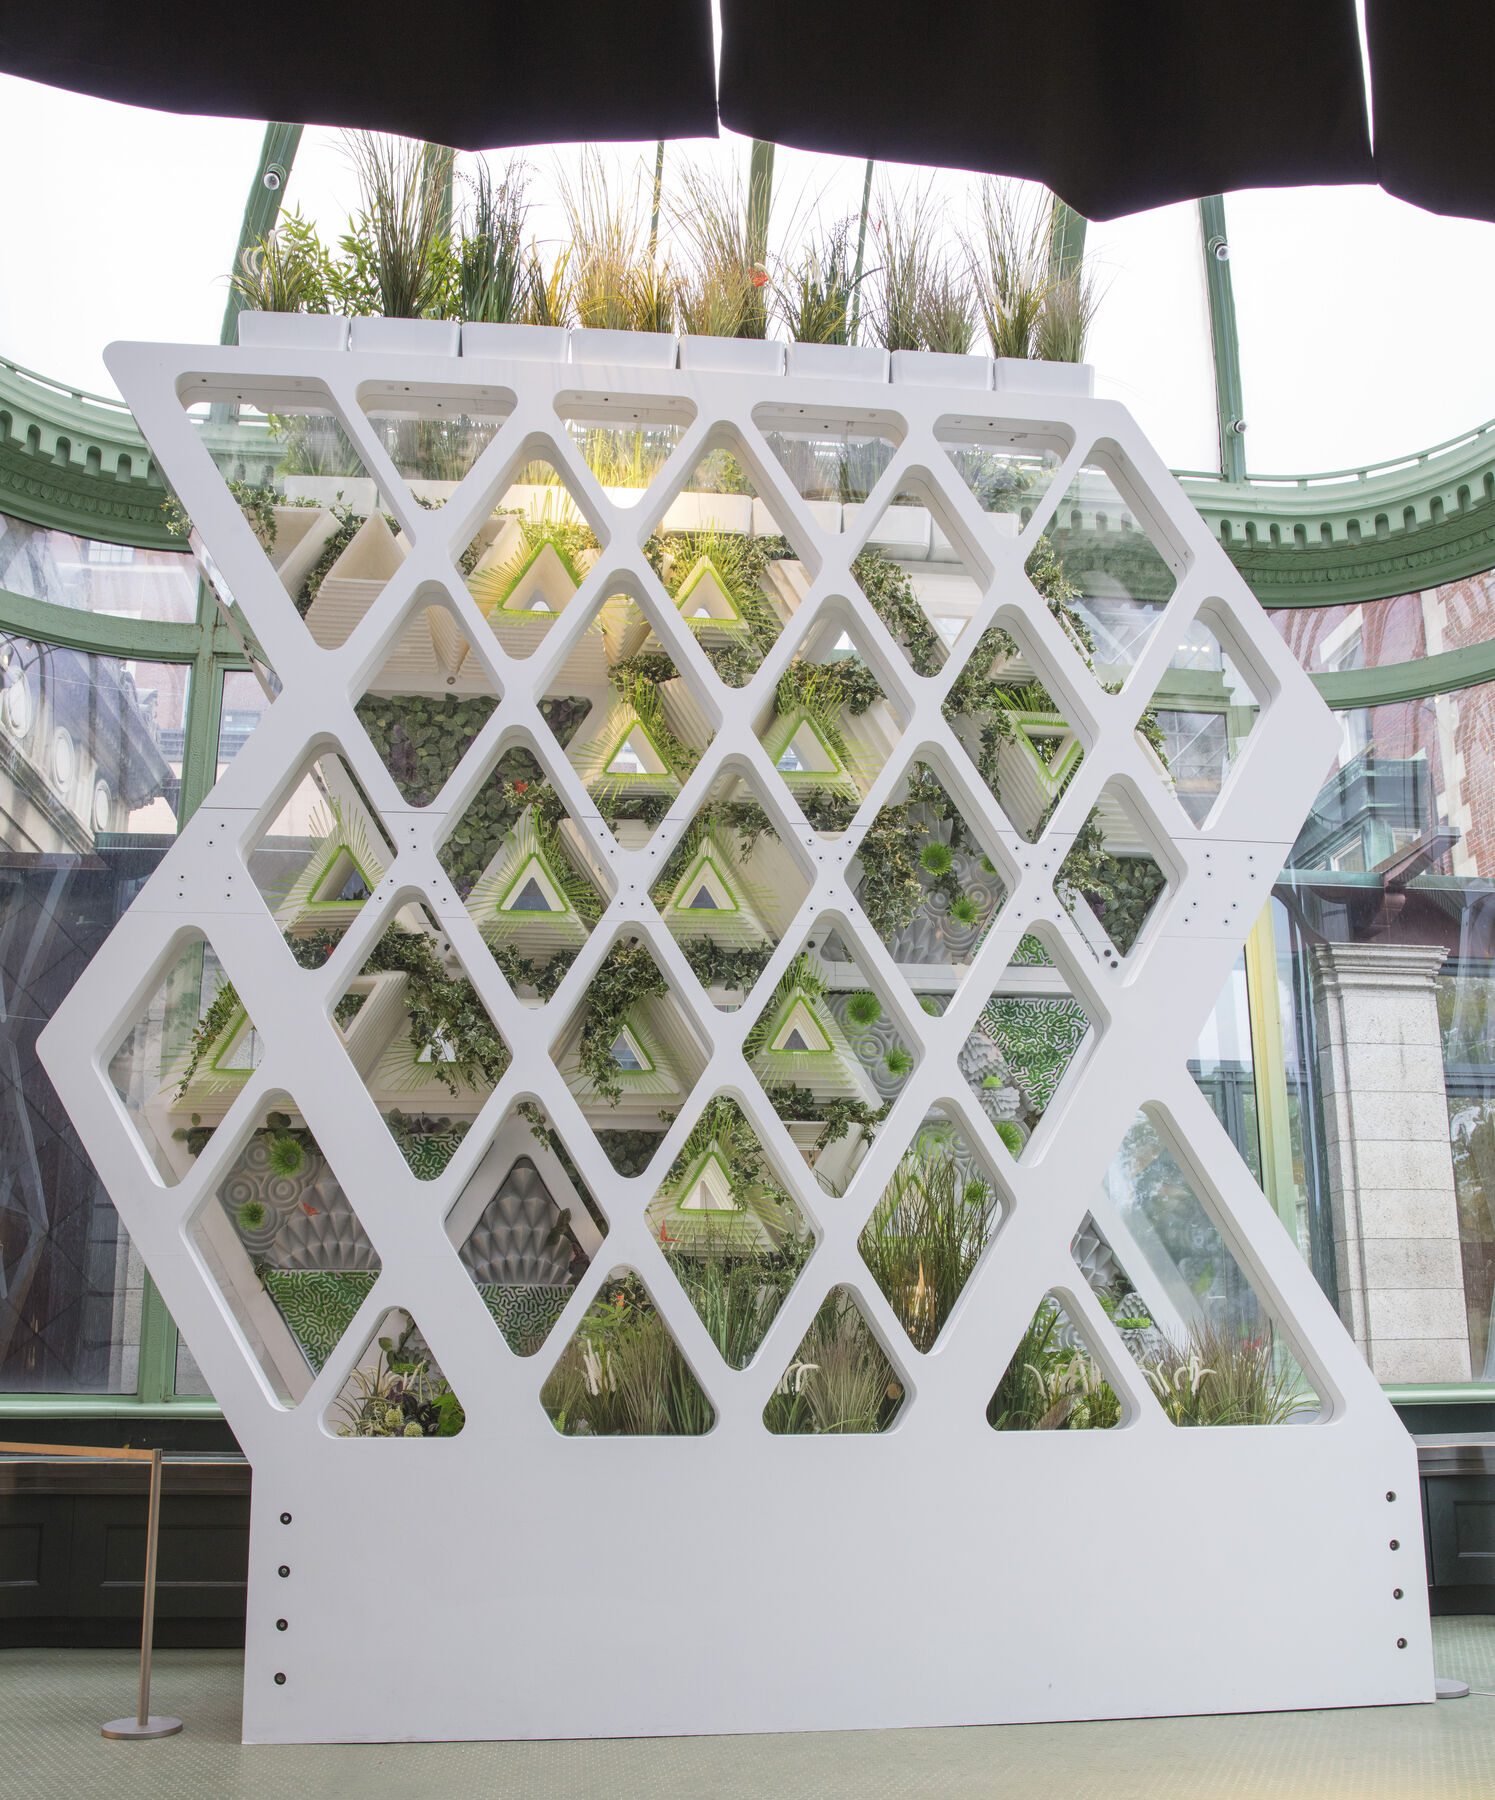 A rhombus-like structure with diamond pattern cut through with plants being hanged in between the structure